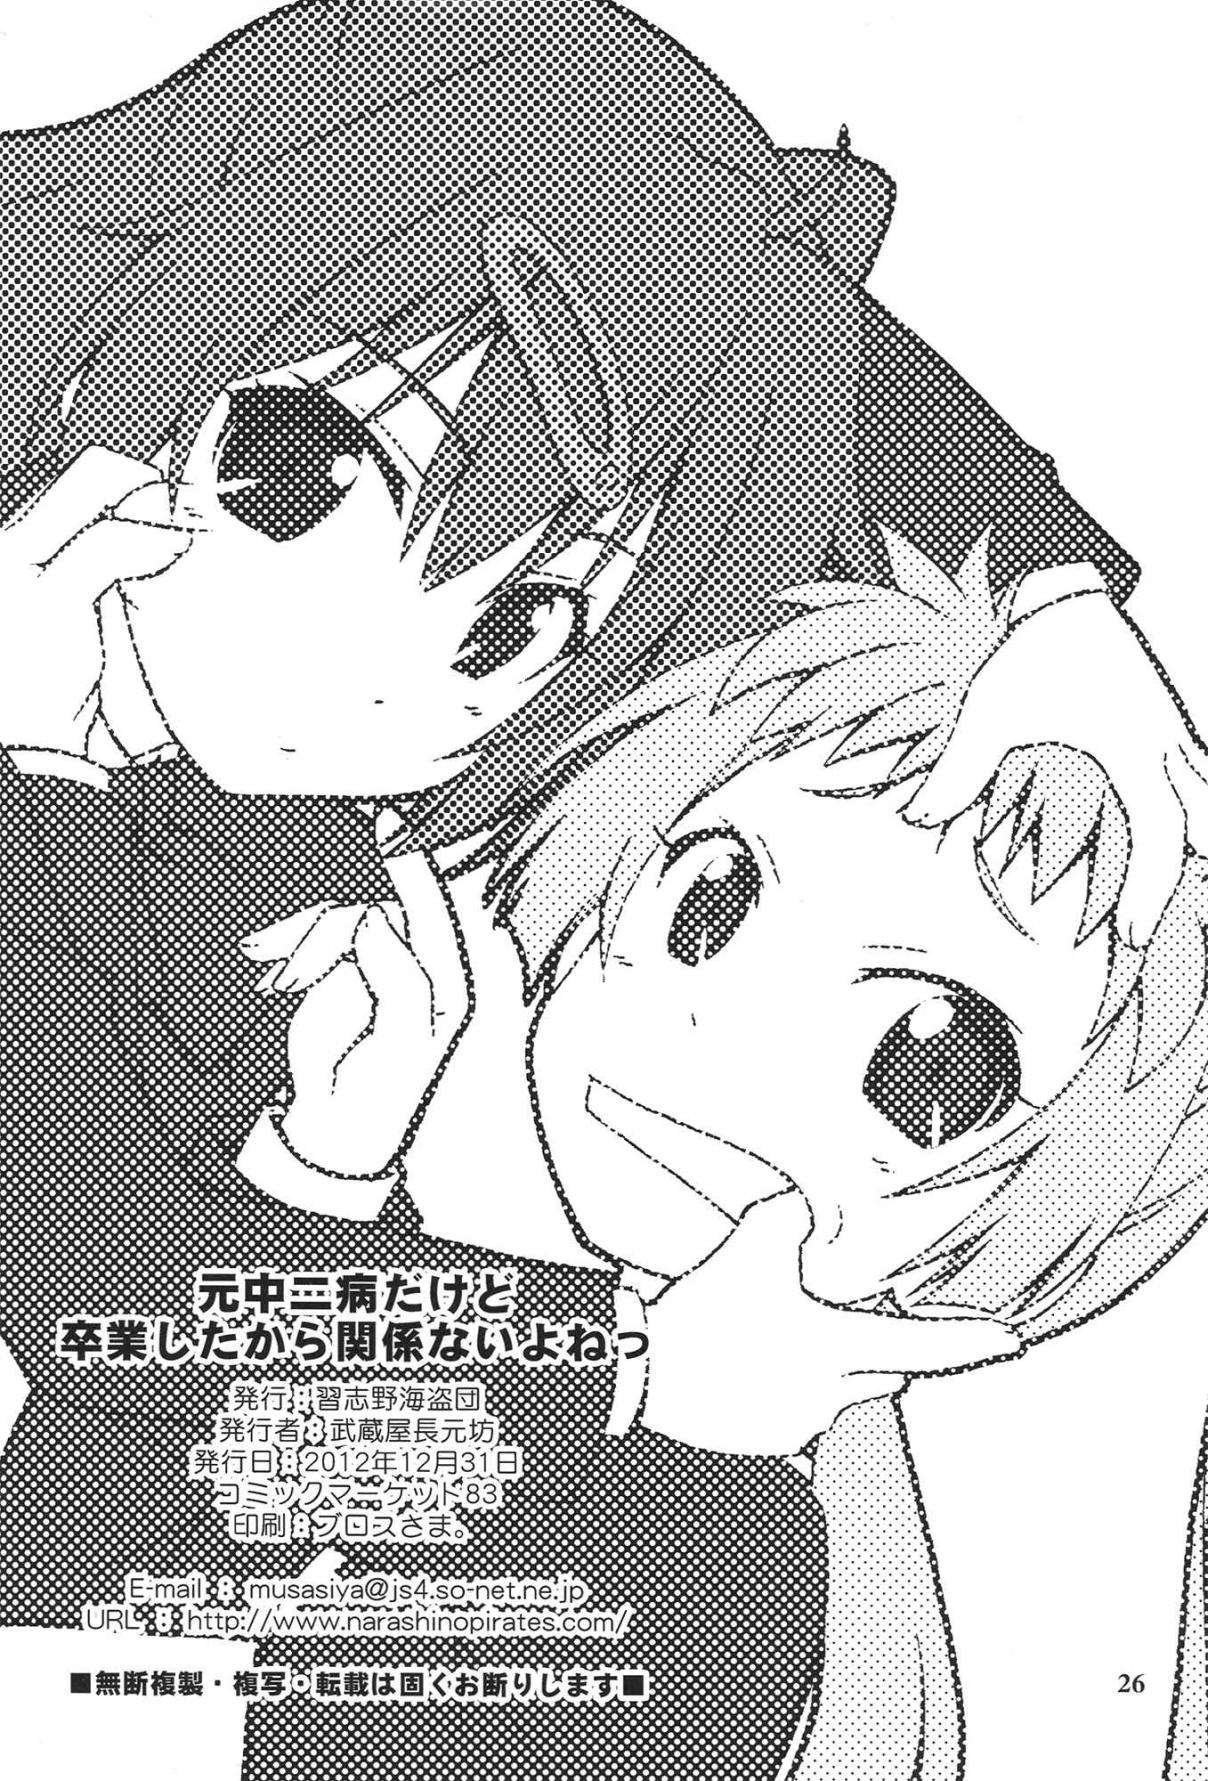 Chuunibyou Demo Koi ga Shitai! I Used To Have Eighth Grade Sickness, But It Doesn’t Matter Since I’m Over It Now (Doujinshi) Oneshot